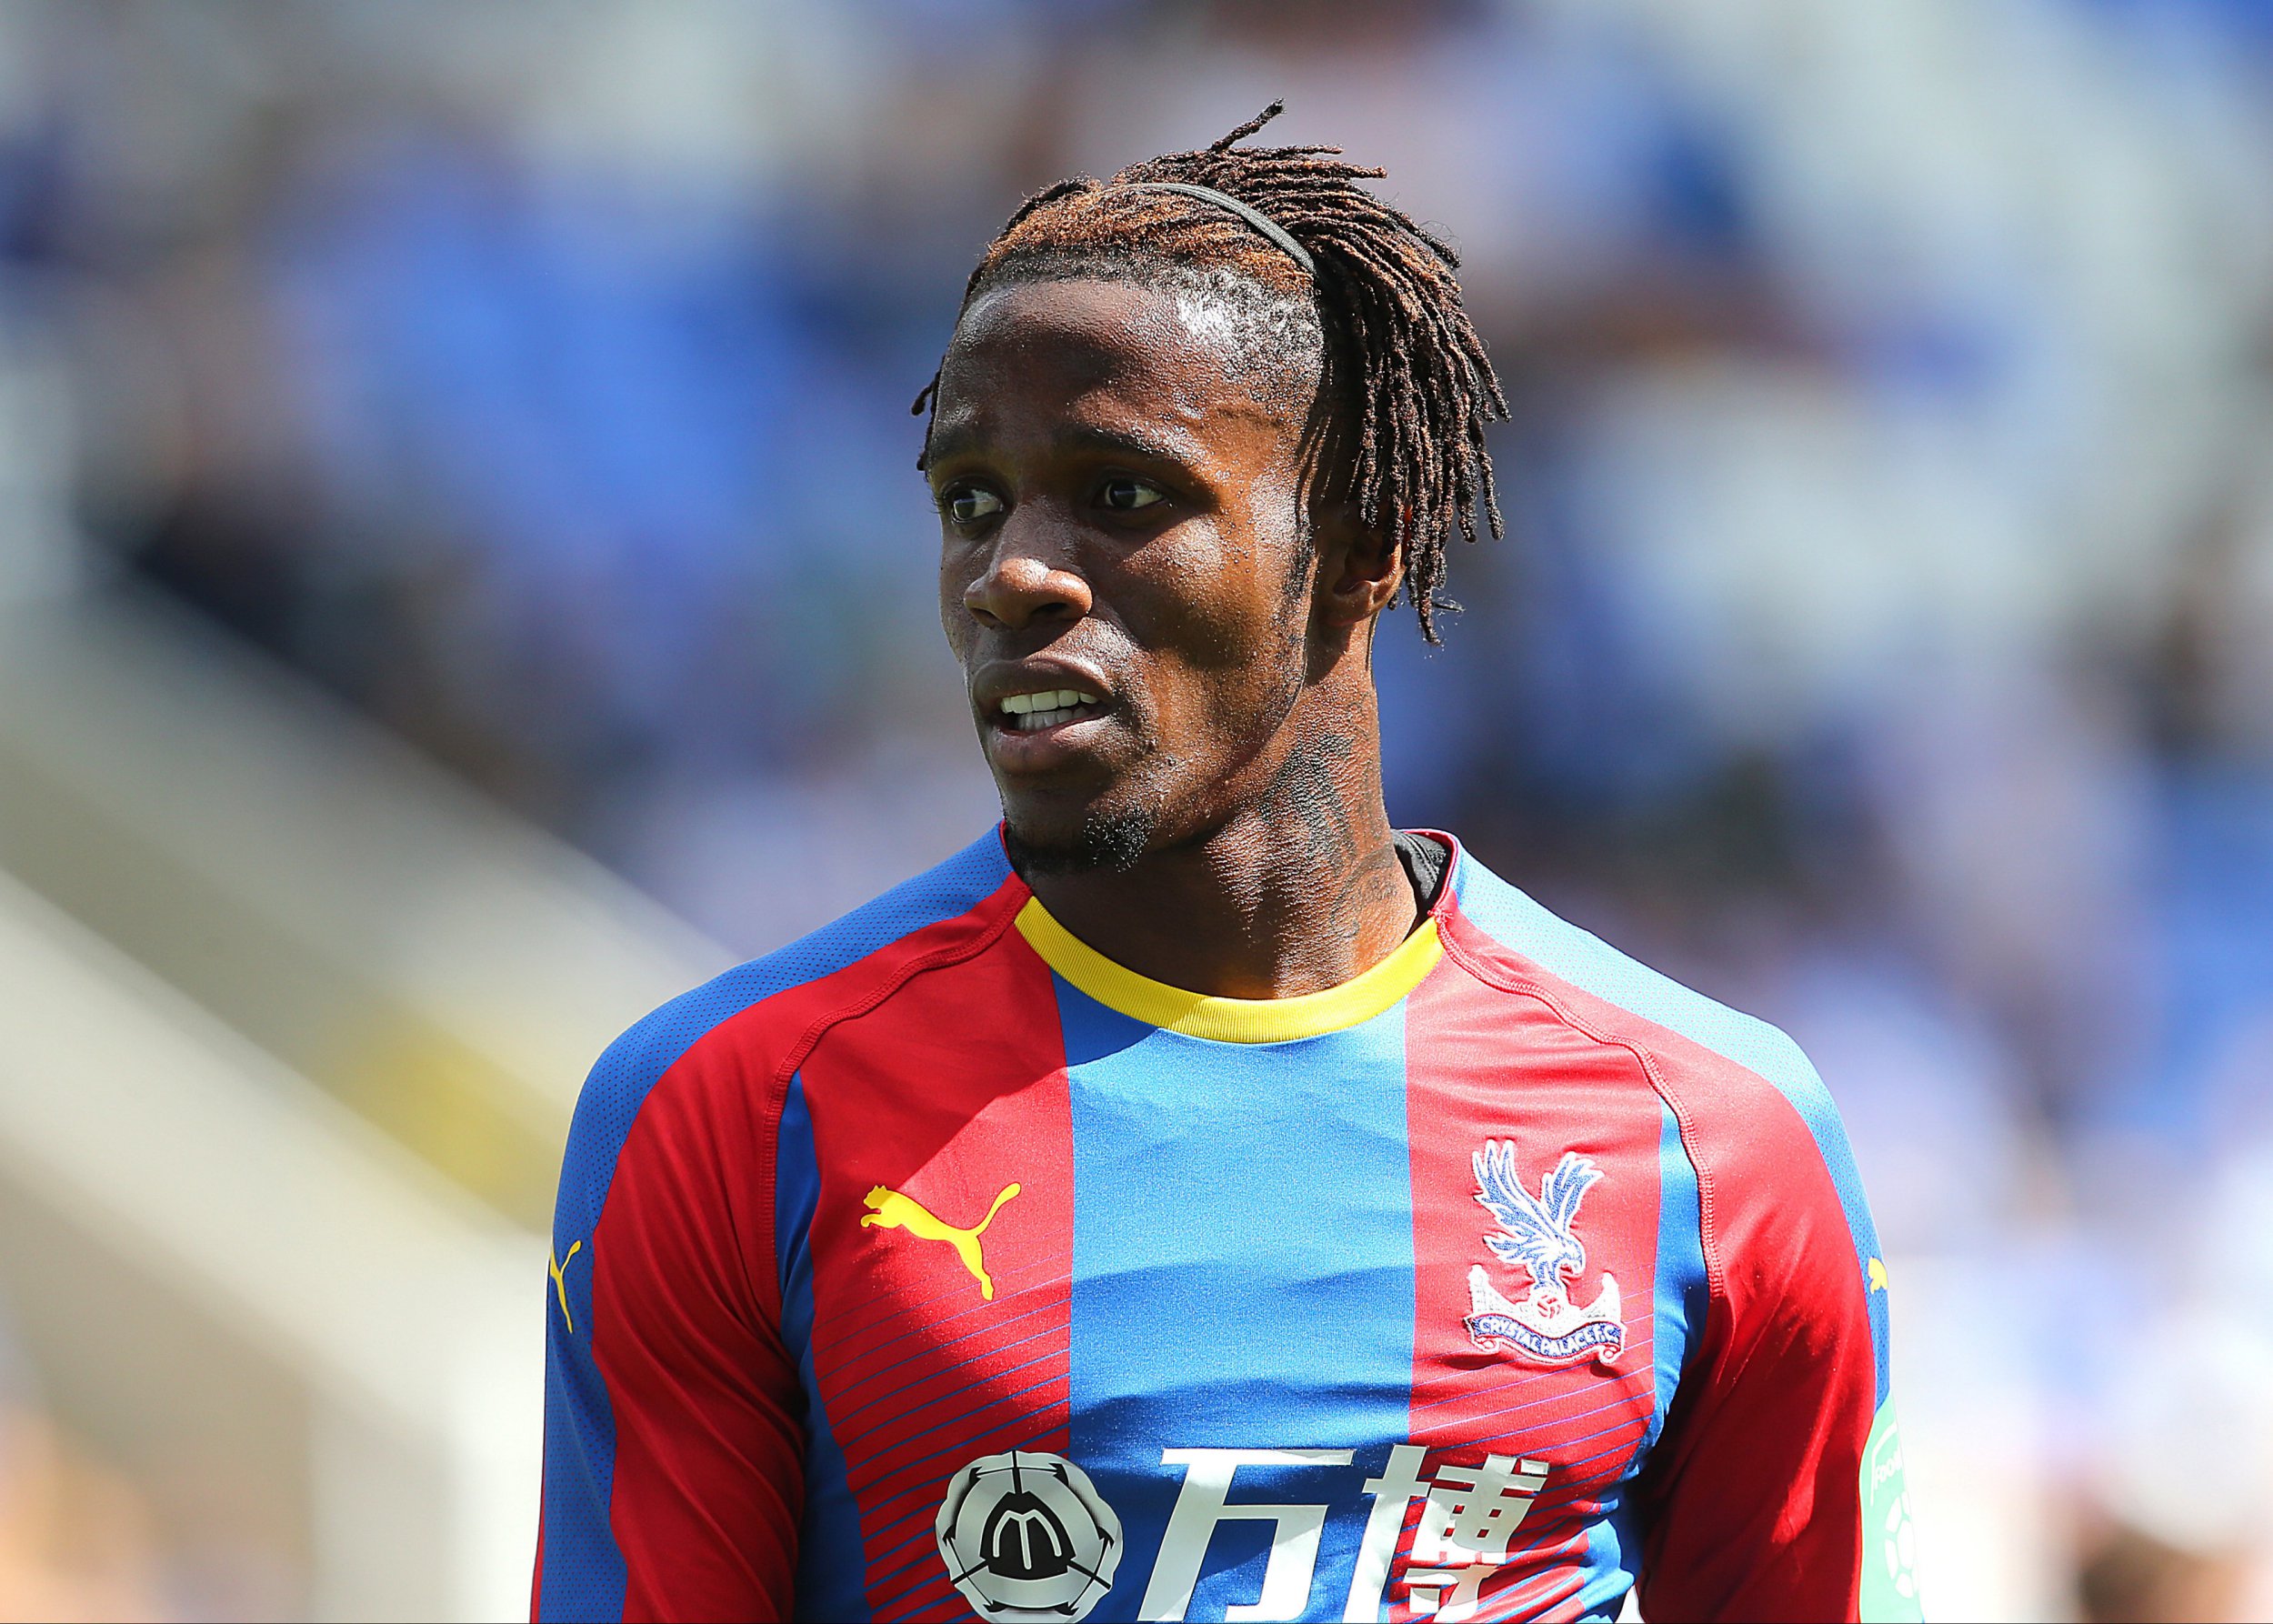 Wilfried Zaha wants to join Chelsea from Crystal Palace before transfer window closes